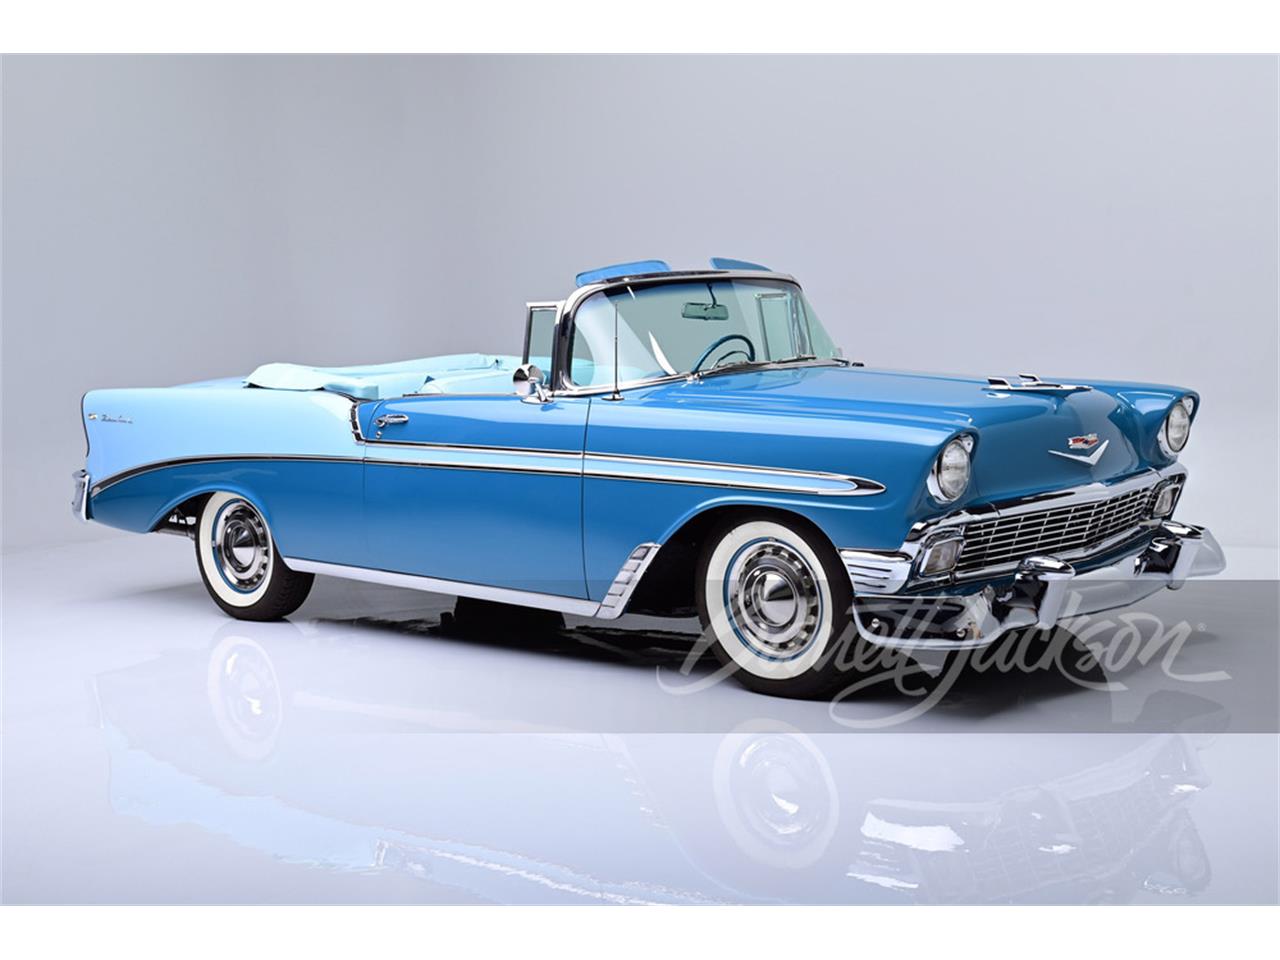 For Sale at Auction: 1956 Chevrolet Bel Air in Scottsdale, Arizona for sale in Scottsdale, AZ